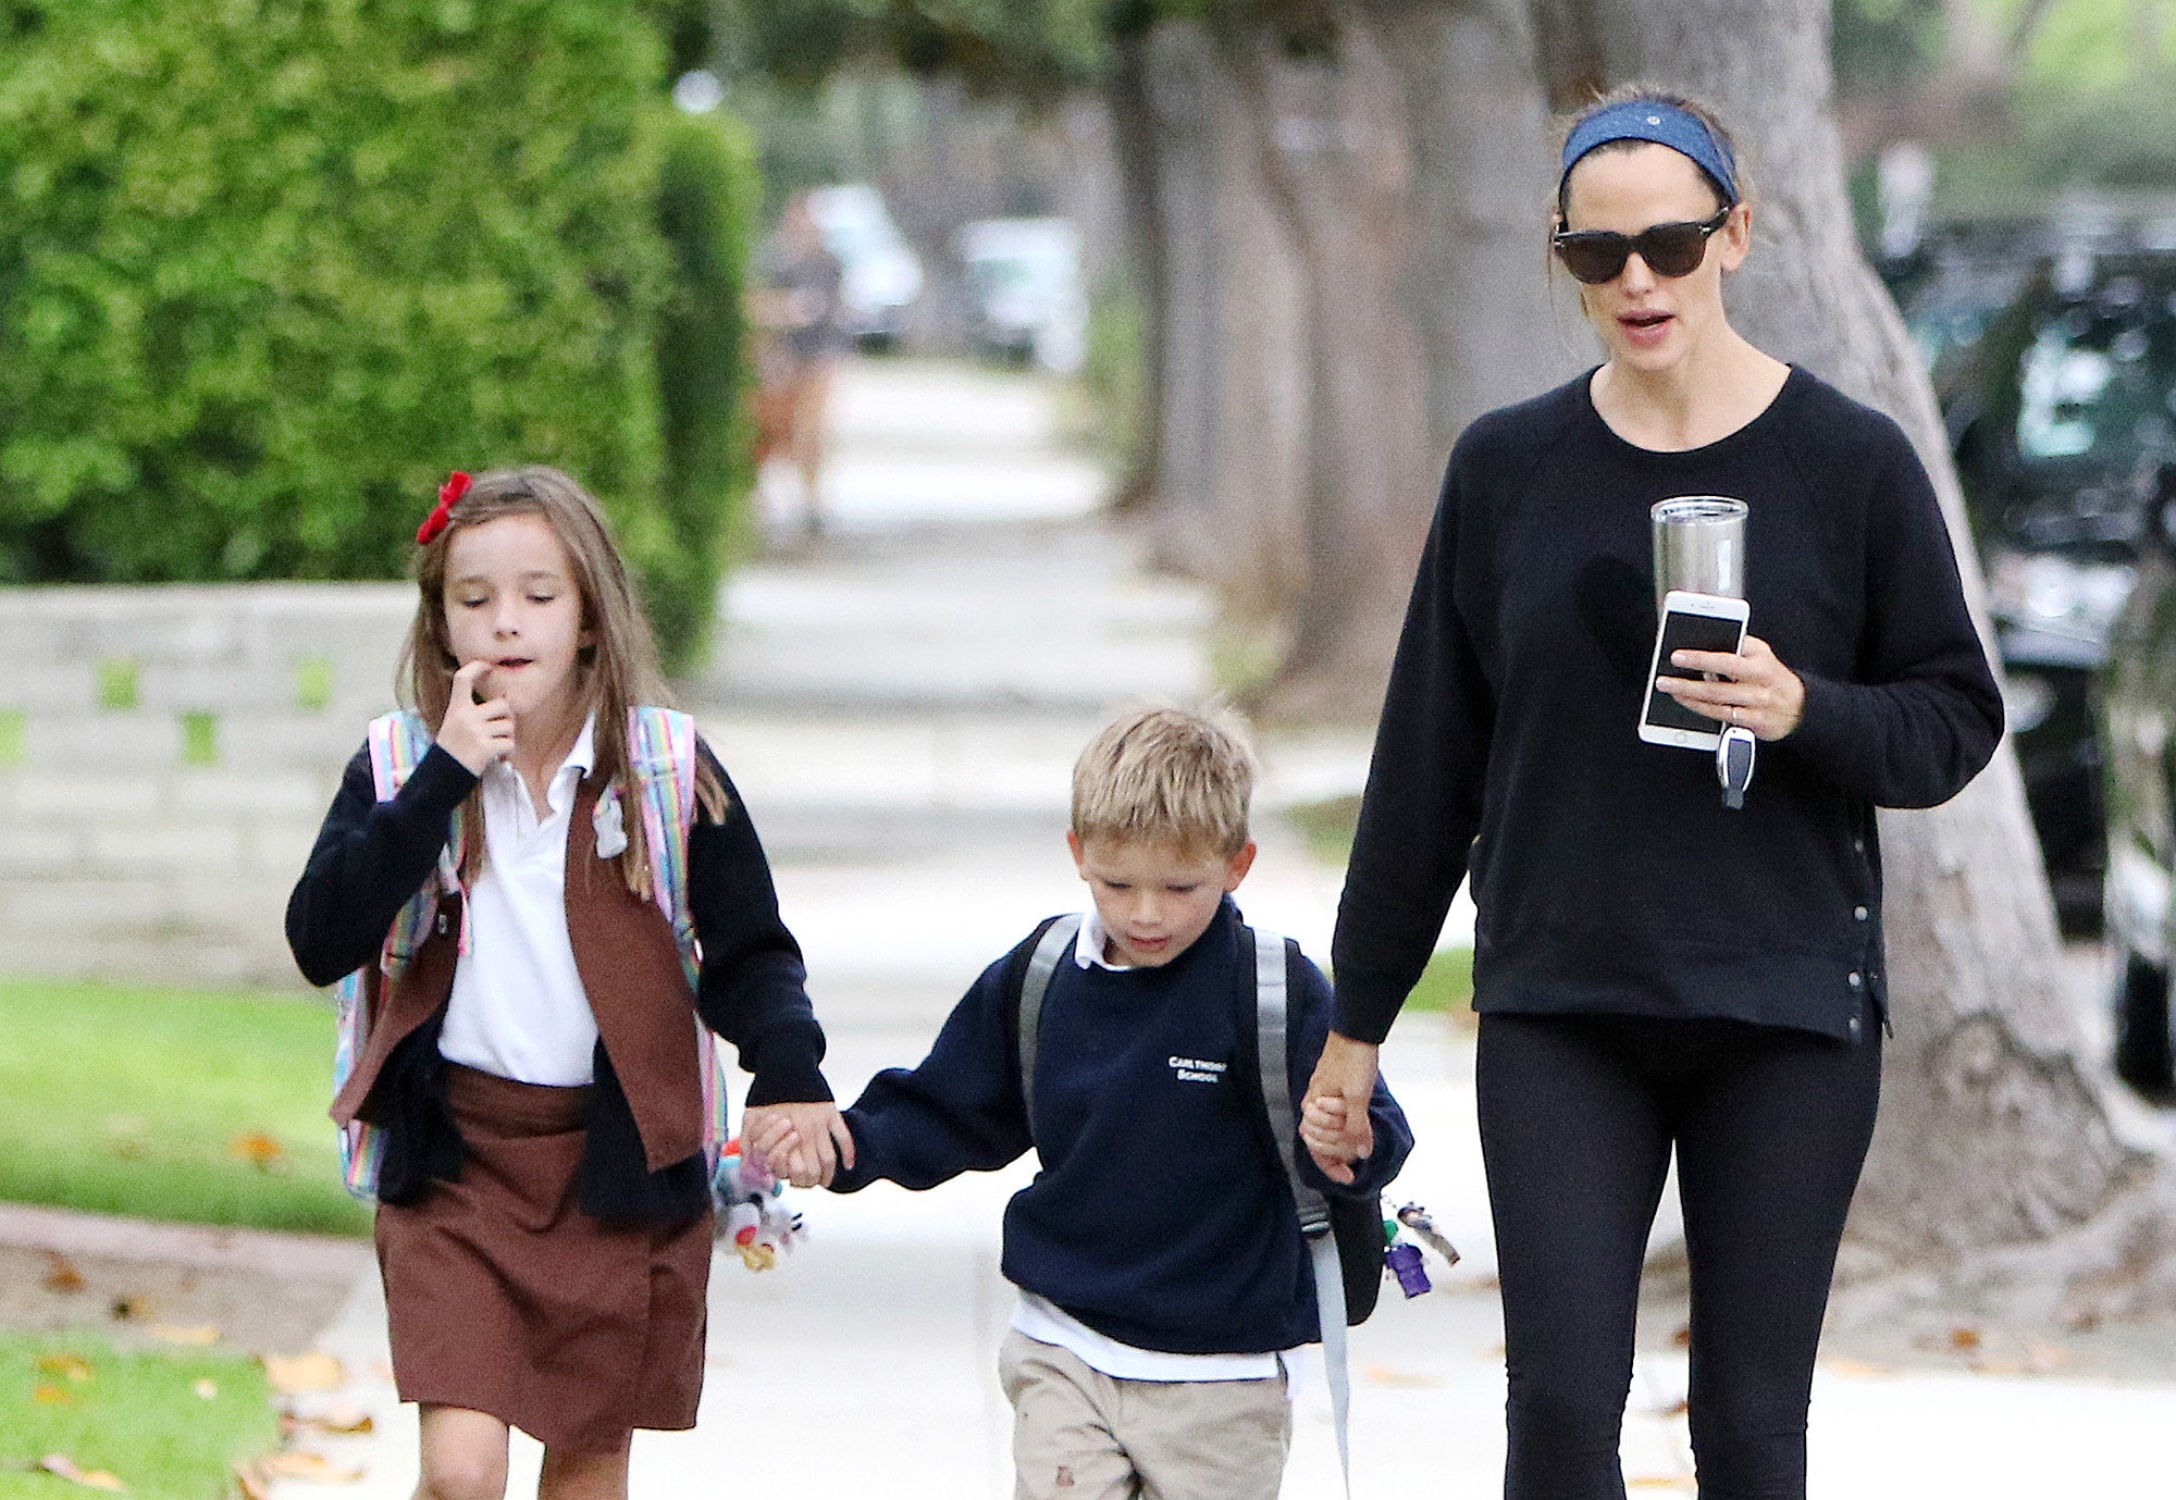 Jennifer Garner Opens Up About How Her Has Changed After Having Children CafeMom.com